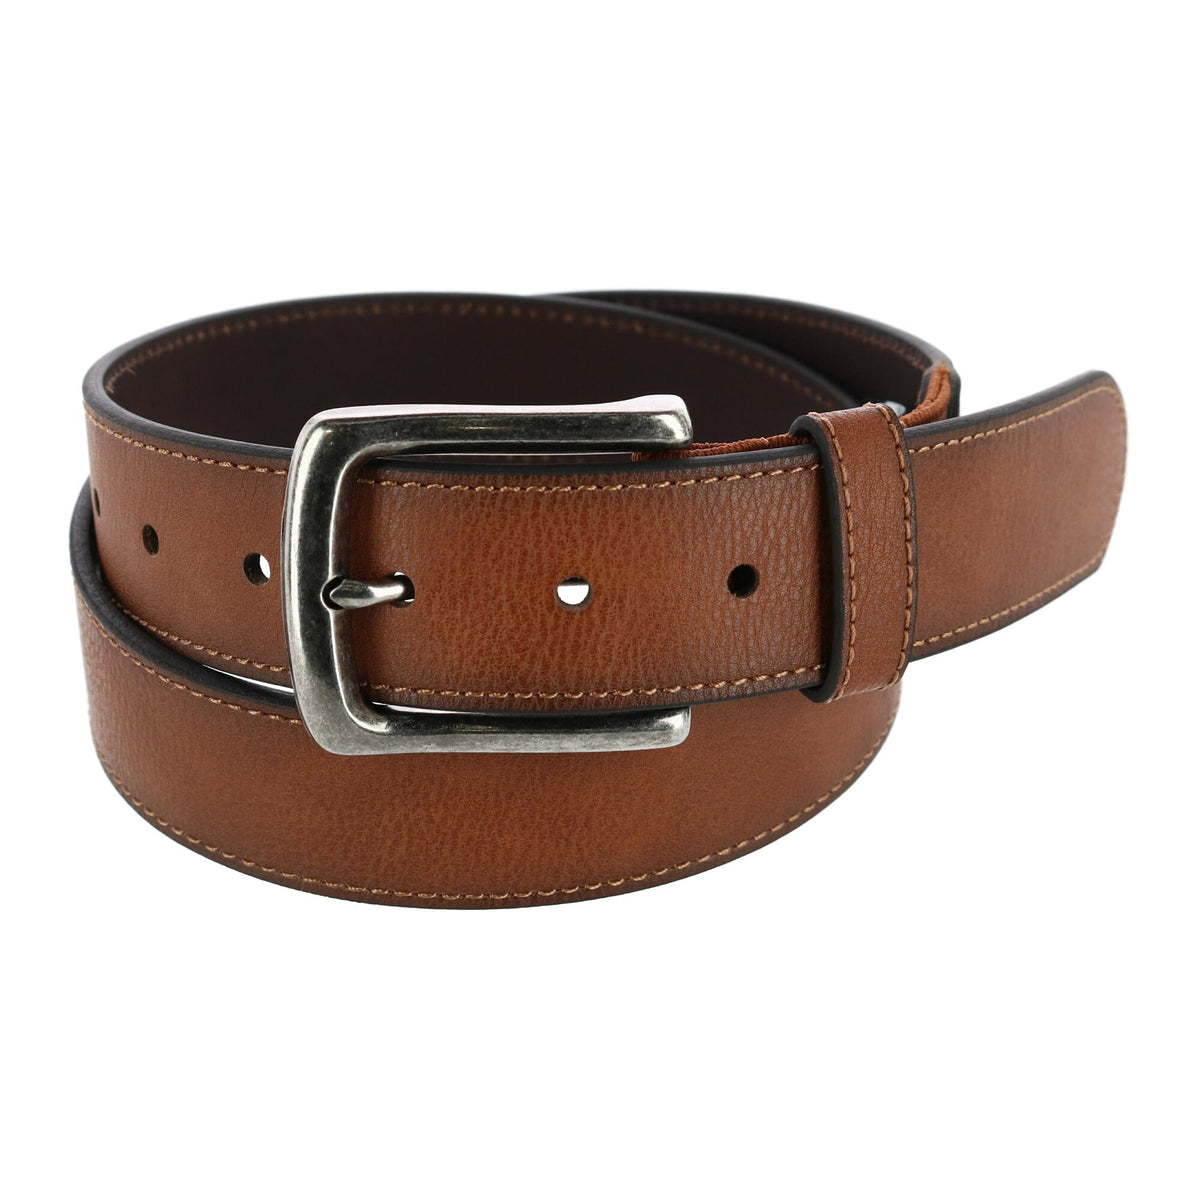 Men's Hidden Stretch Belt by Realtree | Casual And Jean Belts at ...